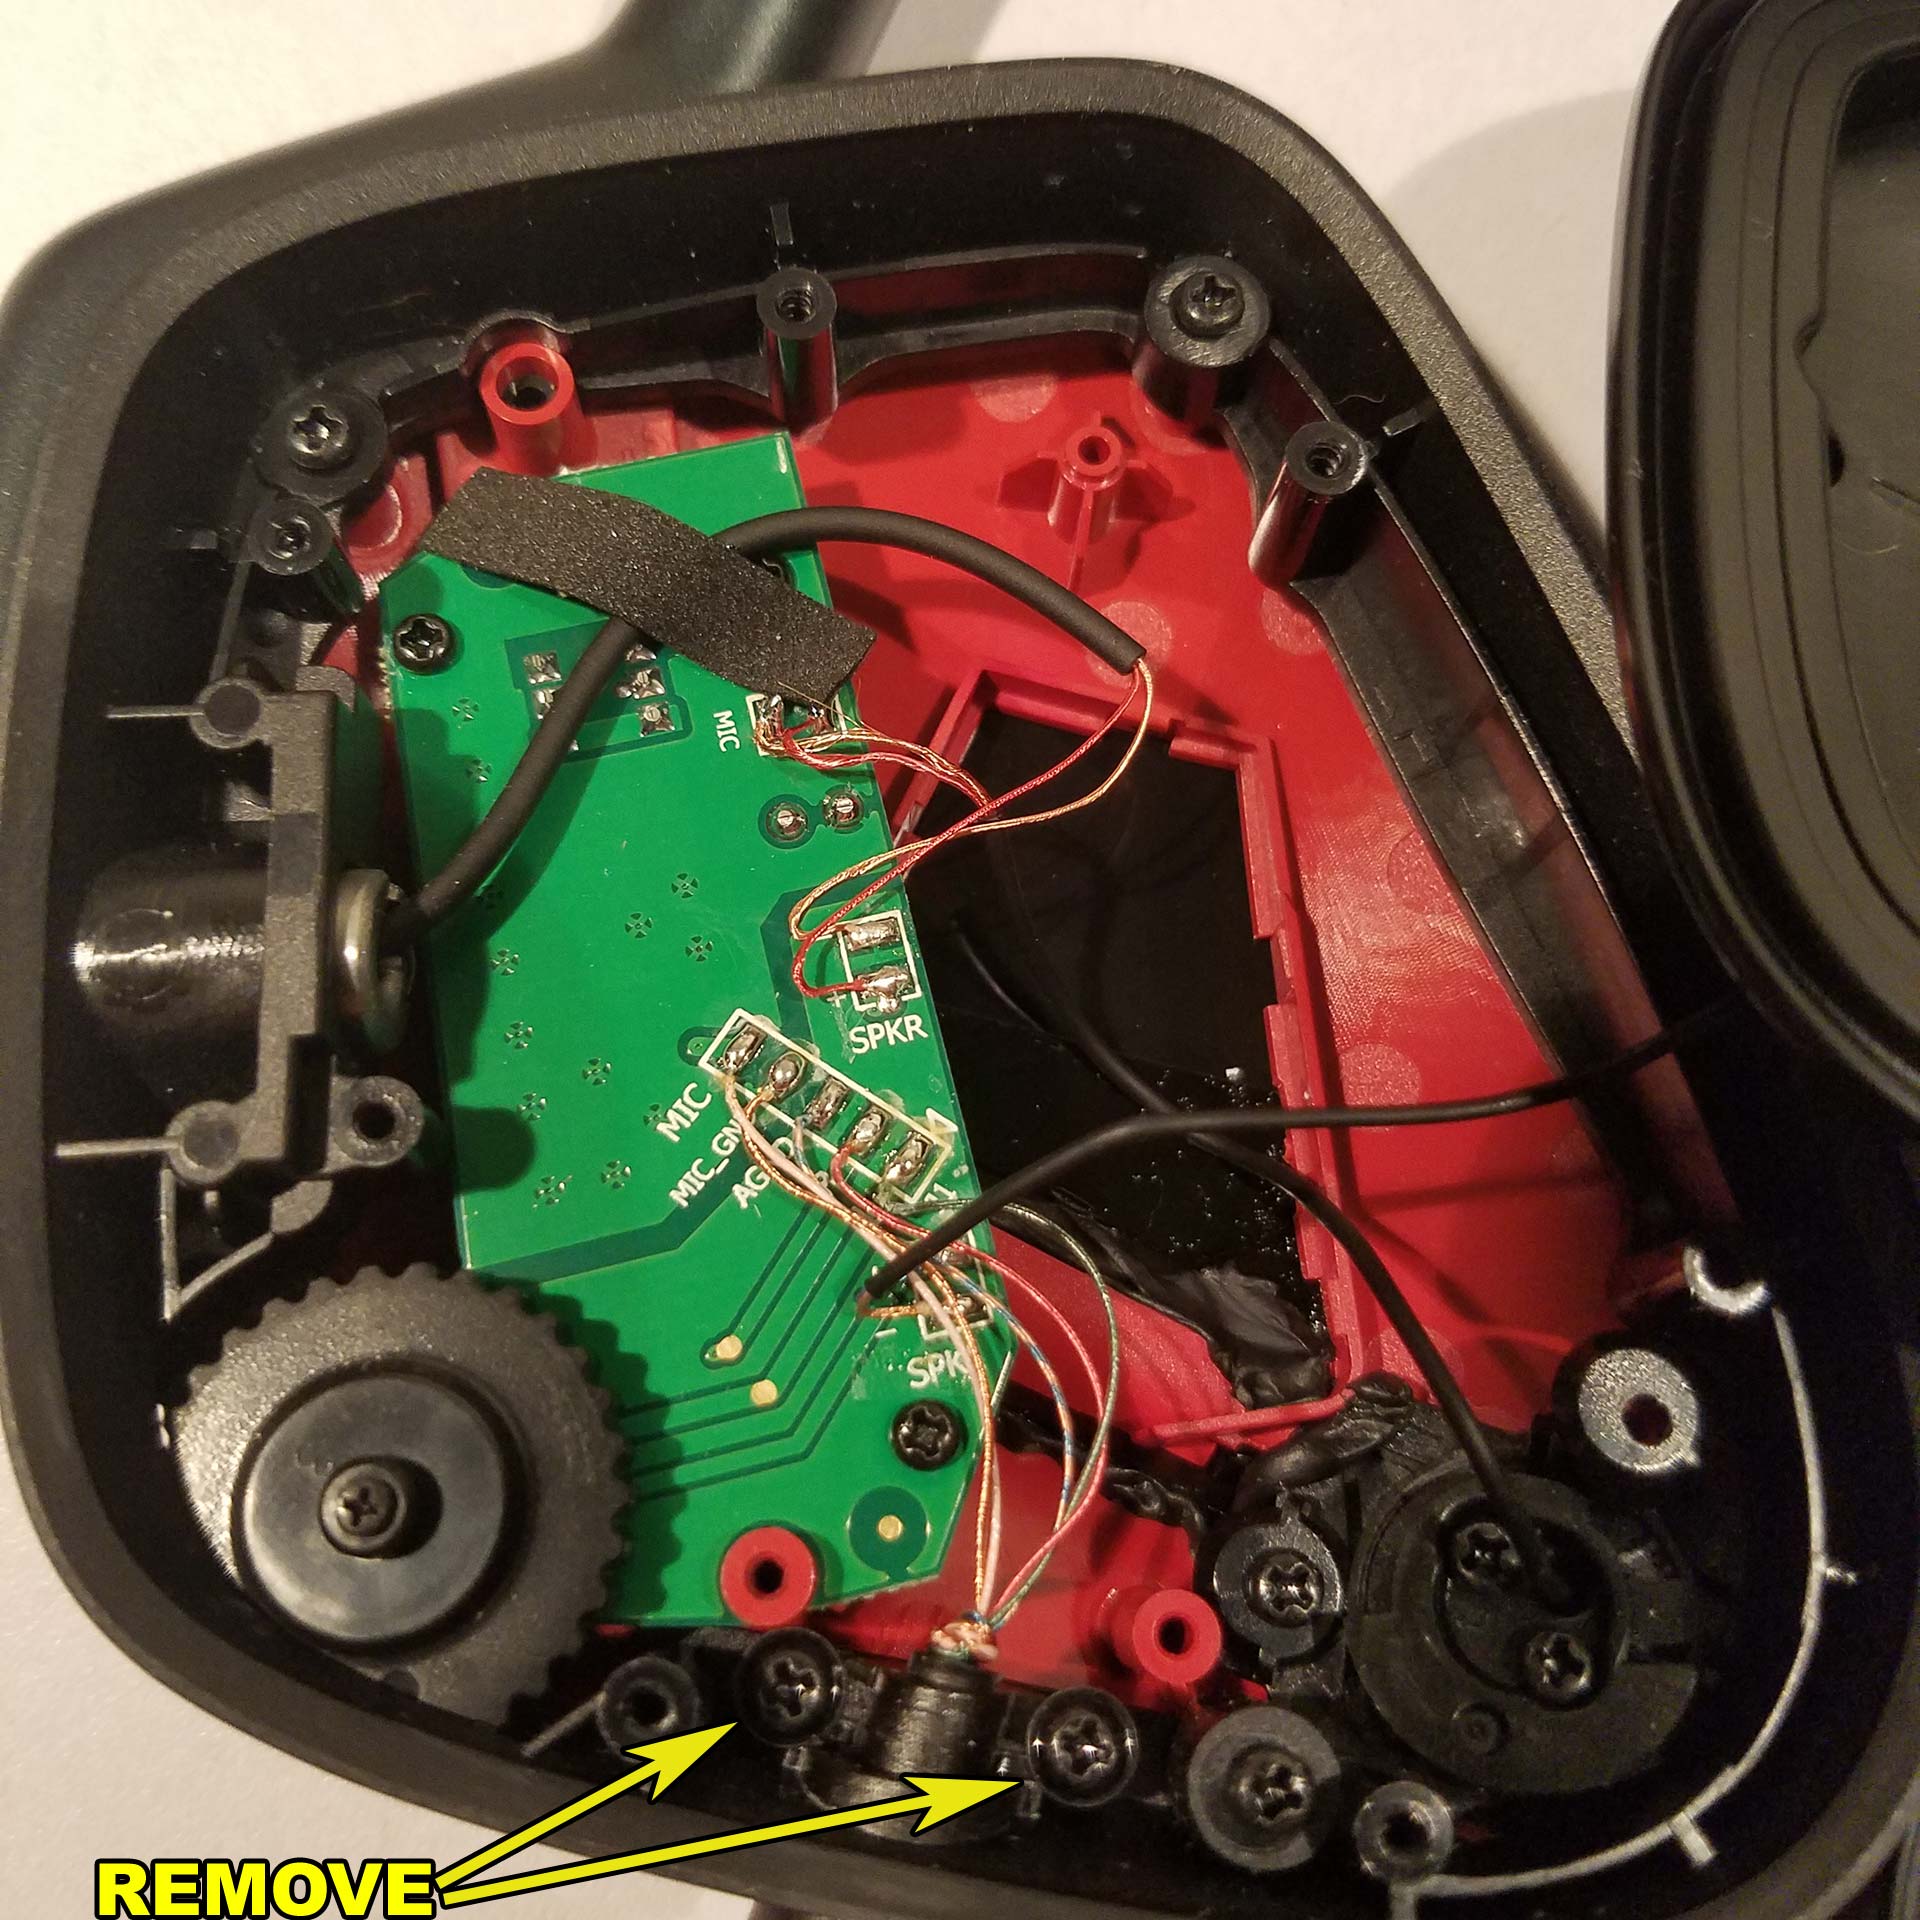 enhed Destruktiv Tulipaner Corsair Void Pro – Disassembly and Repair. – S-Config